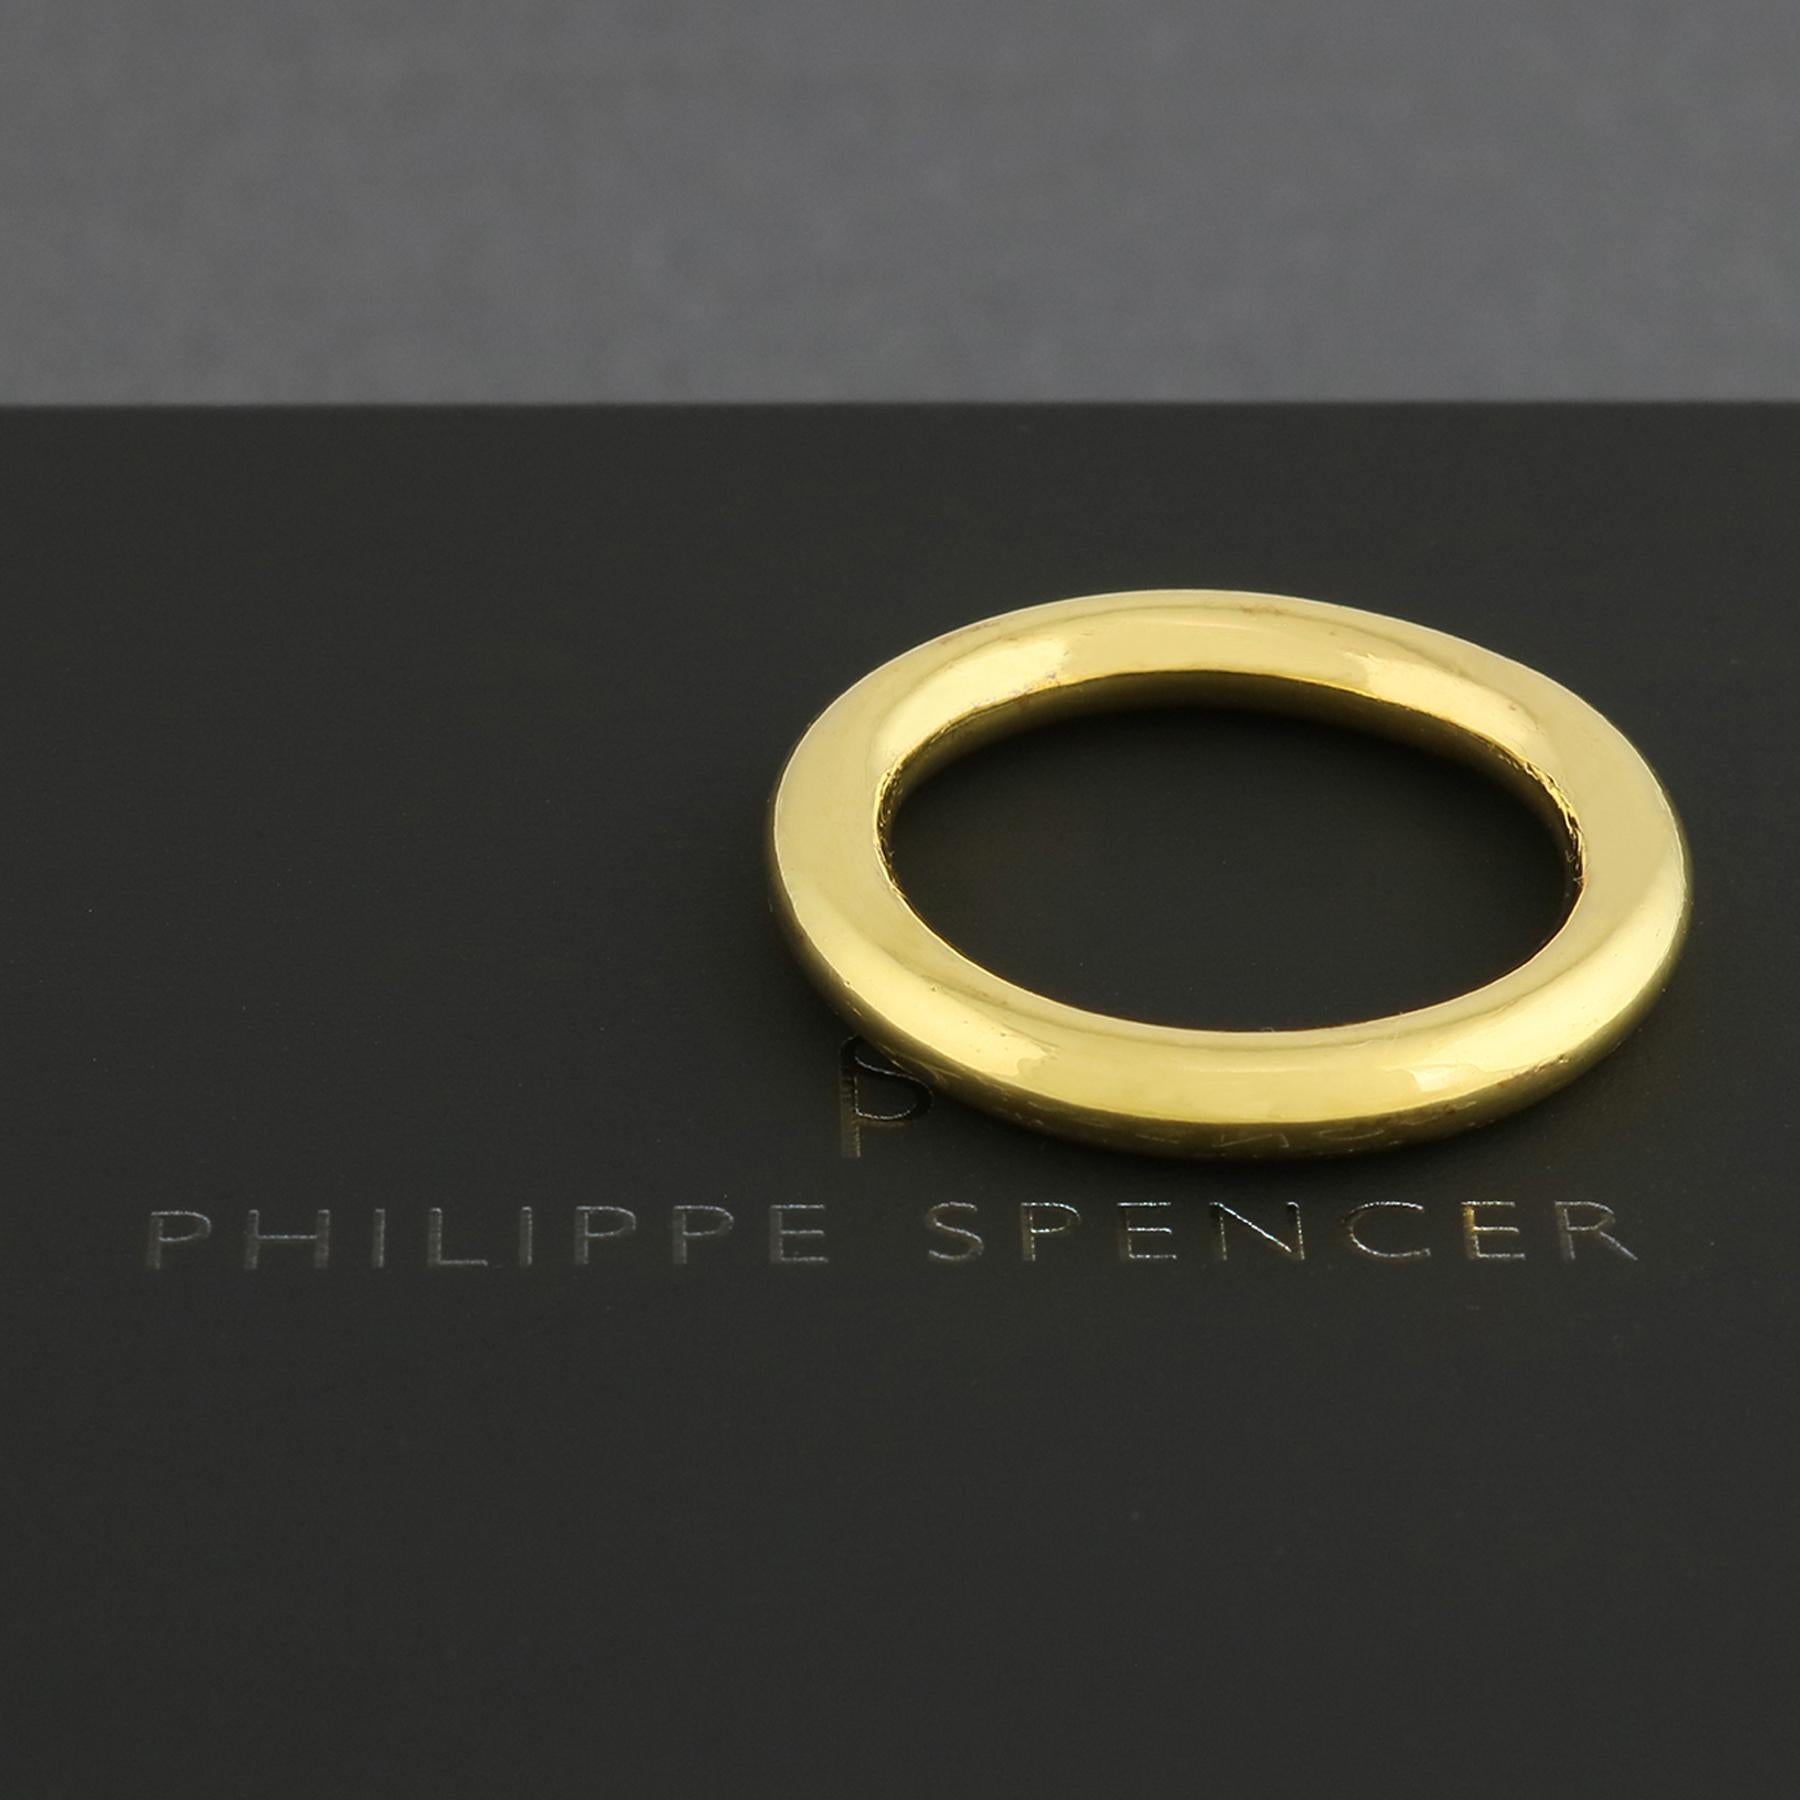 PHILIPPE-SPENCER - Men's 3.8mm Round 20K Gold Hand-Forged Ring. Organic Shape & Finish. Completely Hand-Forged. Each is a unique one-of-a-kind work of art. This PHILIPPE SPENCER solid 20K Gold Hand Made ring is especially popular with Men given its